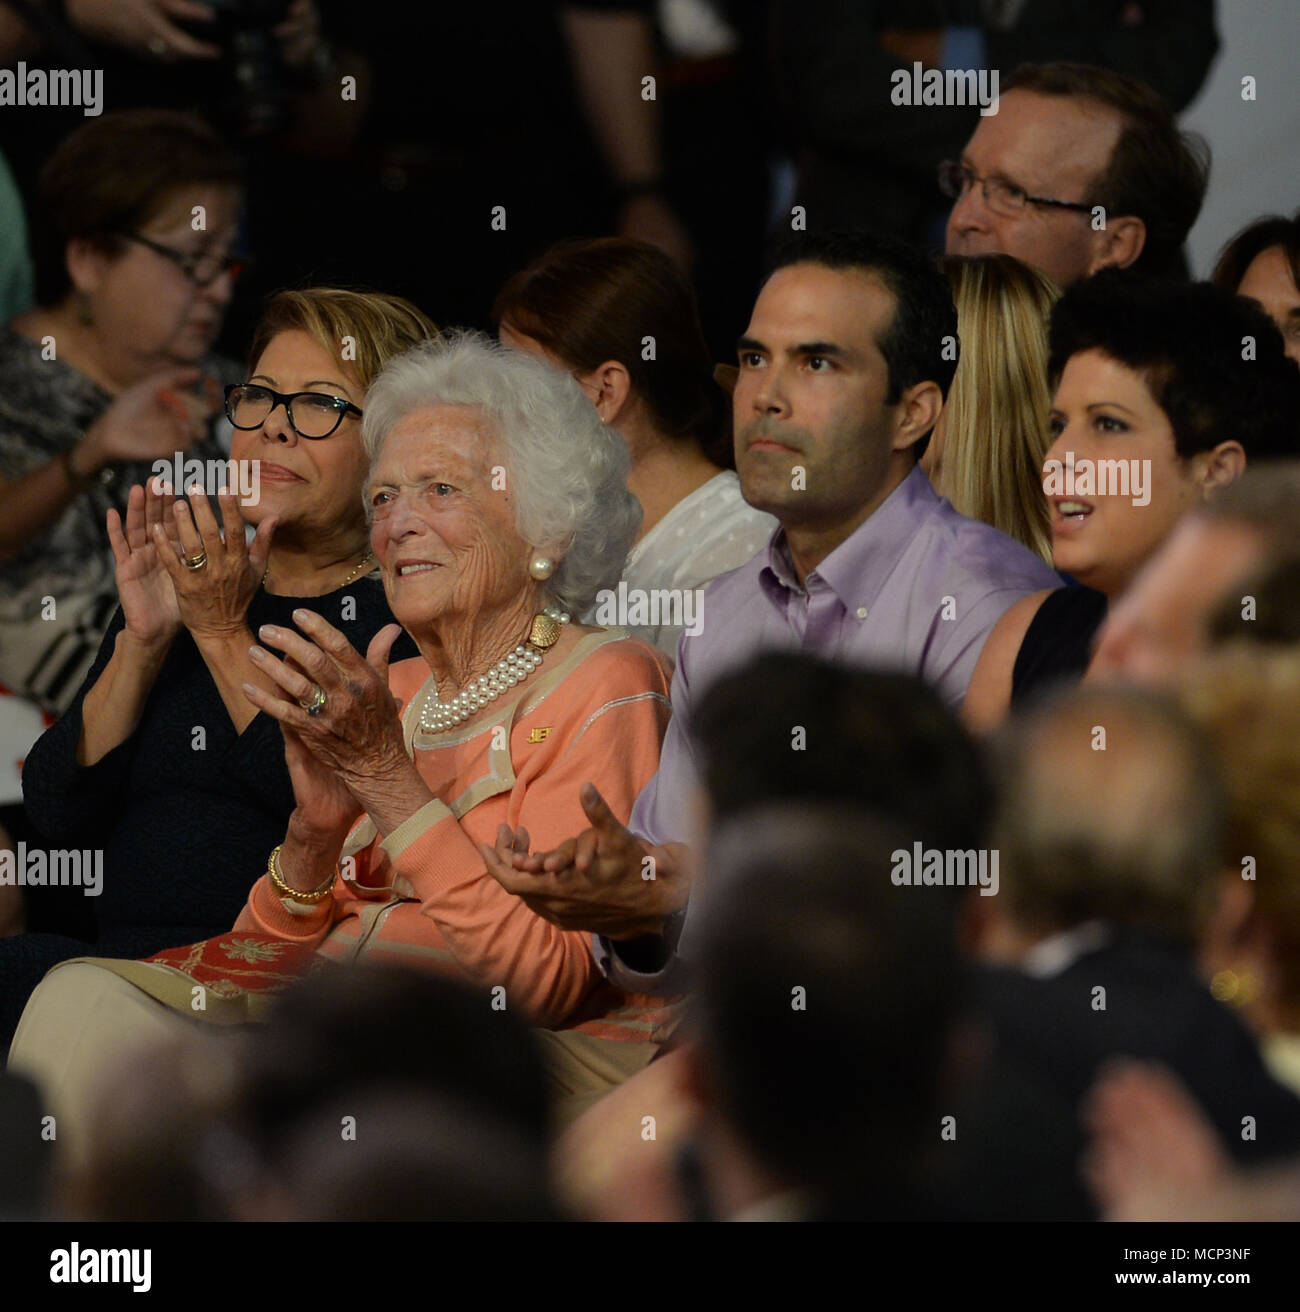 ***FILE PHOO*** BARBARA BUSH HAS PASSED AWAY (1925-2018) MIAMI, FL - JUNE 15: Former Florida Governor Jeb Bush on stage to announce his candidacy for the 2016 Republican presidential nomination at Miami Dade College - Kendall Campus Theodore Gibson Health Center (Gymnasium) June 15, 2015 in Miami, Florida. John Ellis 'Jeb' Bush will attempt to follow his brother and father into the nation's highest office when he officially announces today that he'll run for president of the United States People: Barbara Bush, George P. Bush Transmission Ref: FLXX Hoo-Me.com/MediaPunch Stock Photo